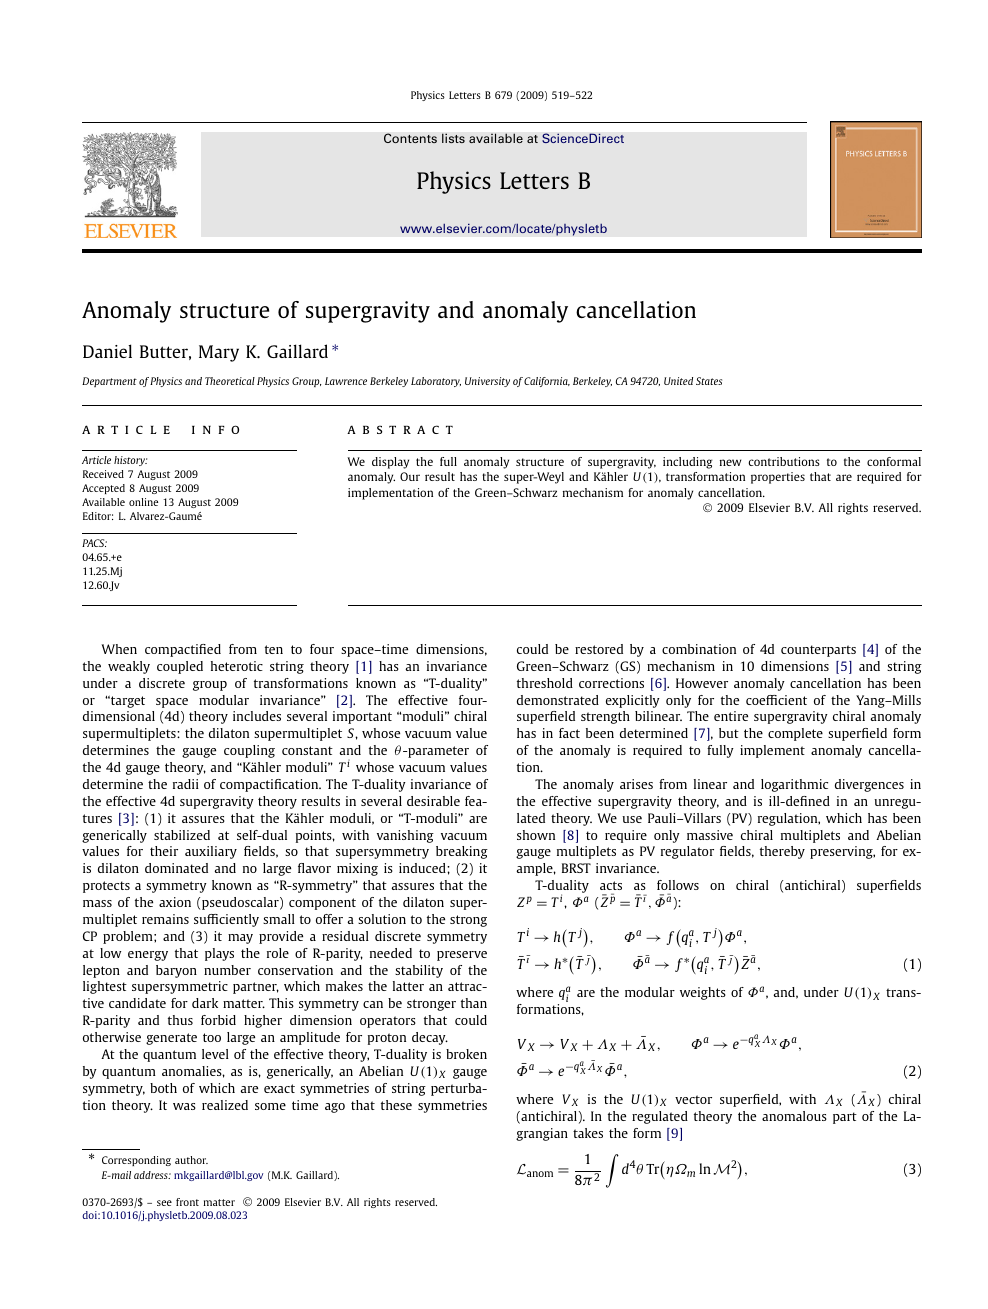 Anomaly Structure Of Supergravity And Anomaly Cancellation Topic Of Research Paper In Physical Sciences Download Scholarly Article Pdf And Read For Free On Cyberleninka Open Science Hub